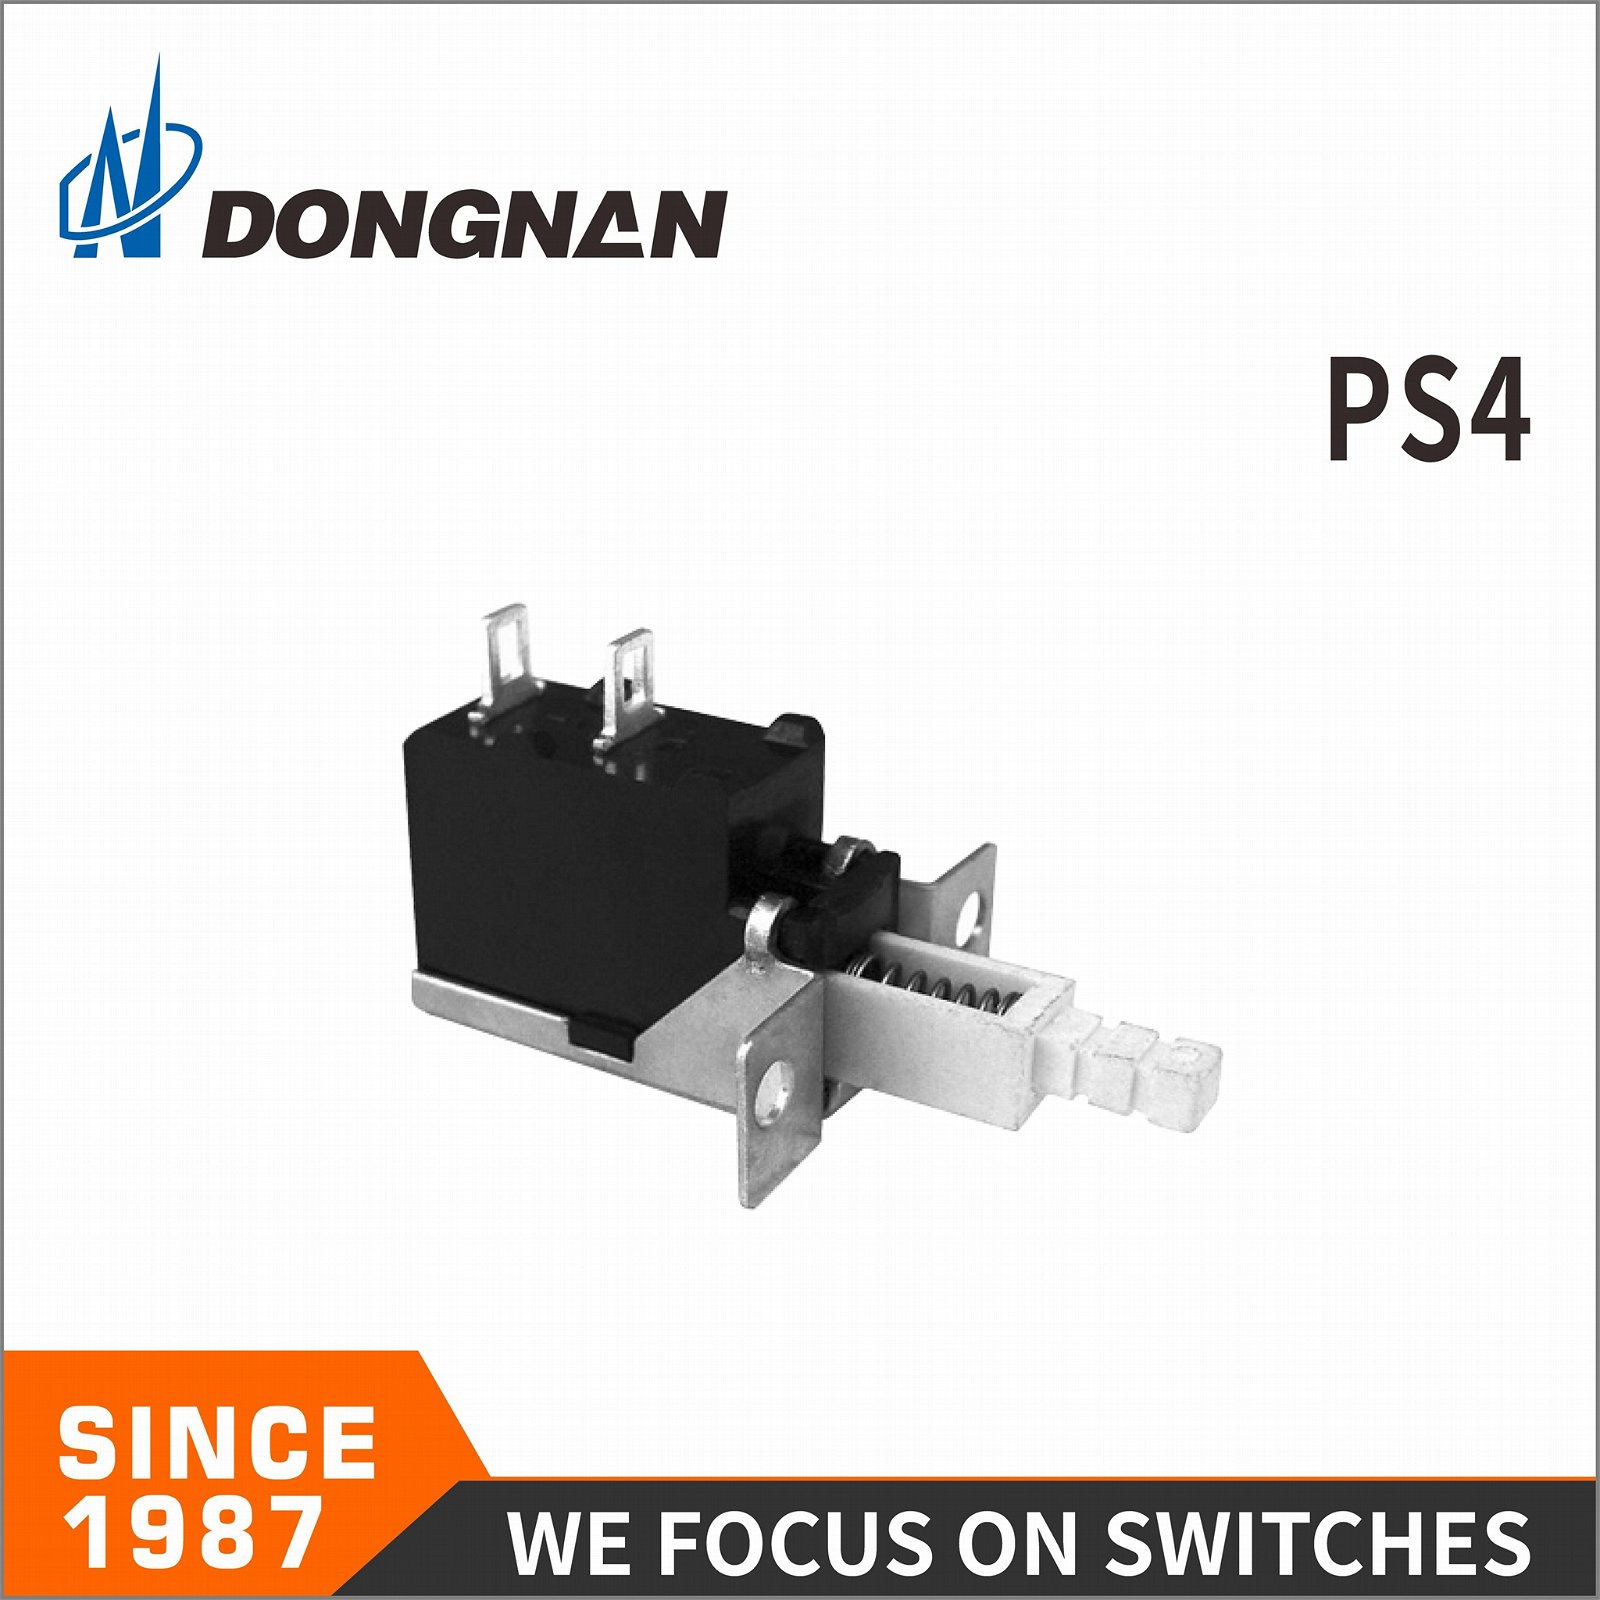 POWER SWITCH(PS4 series)